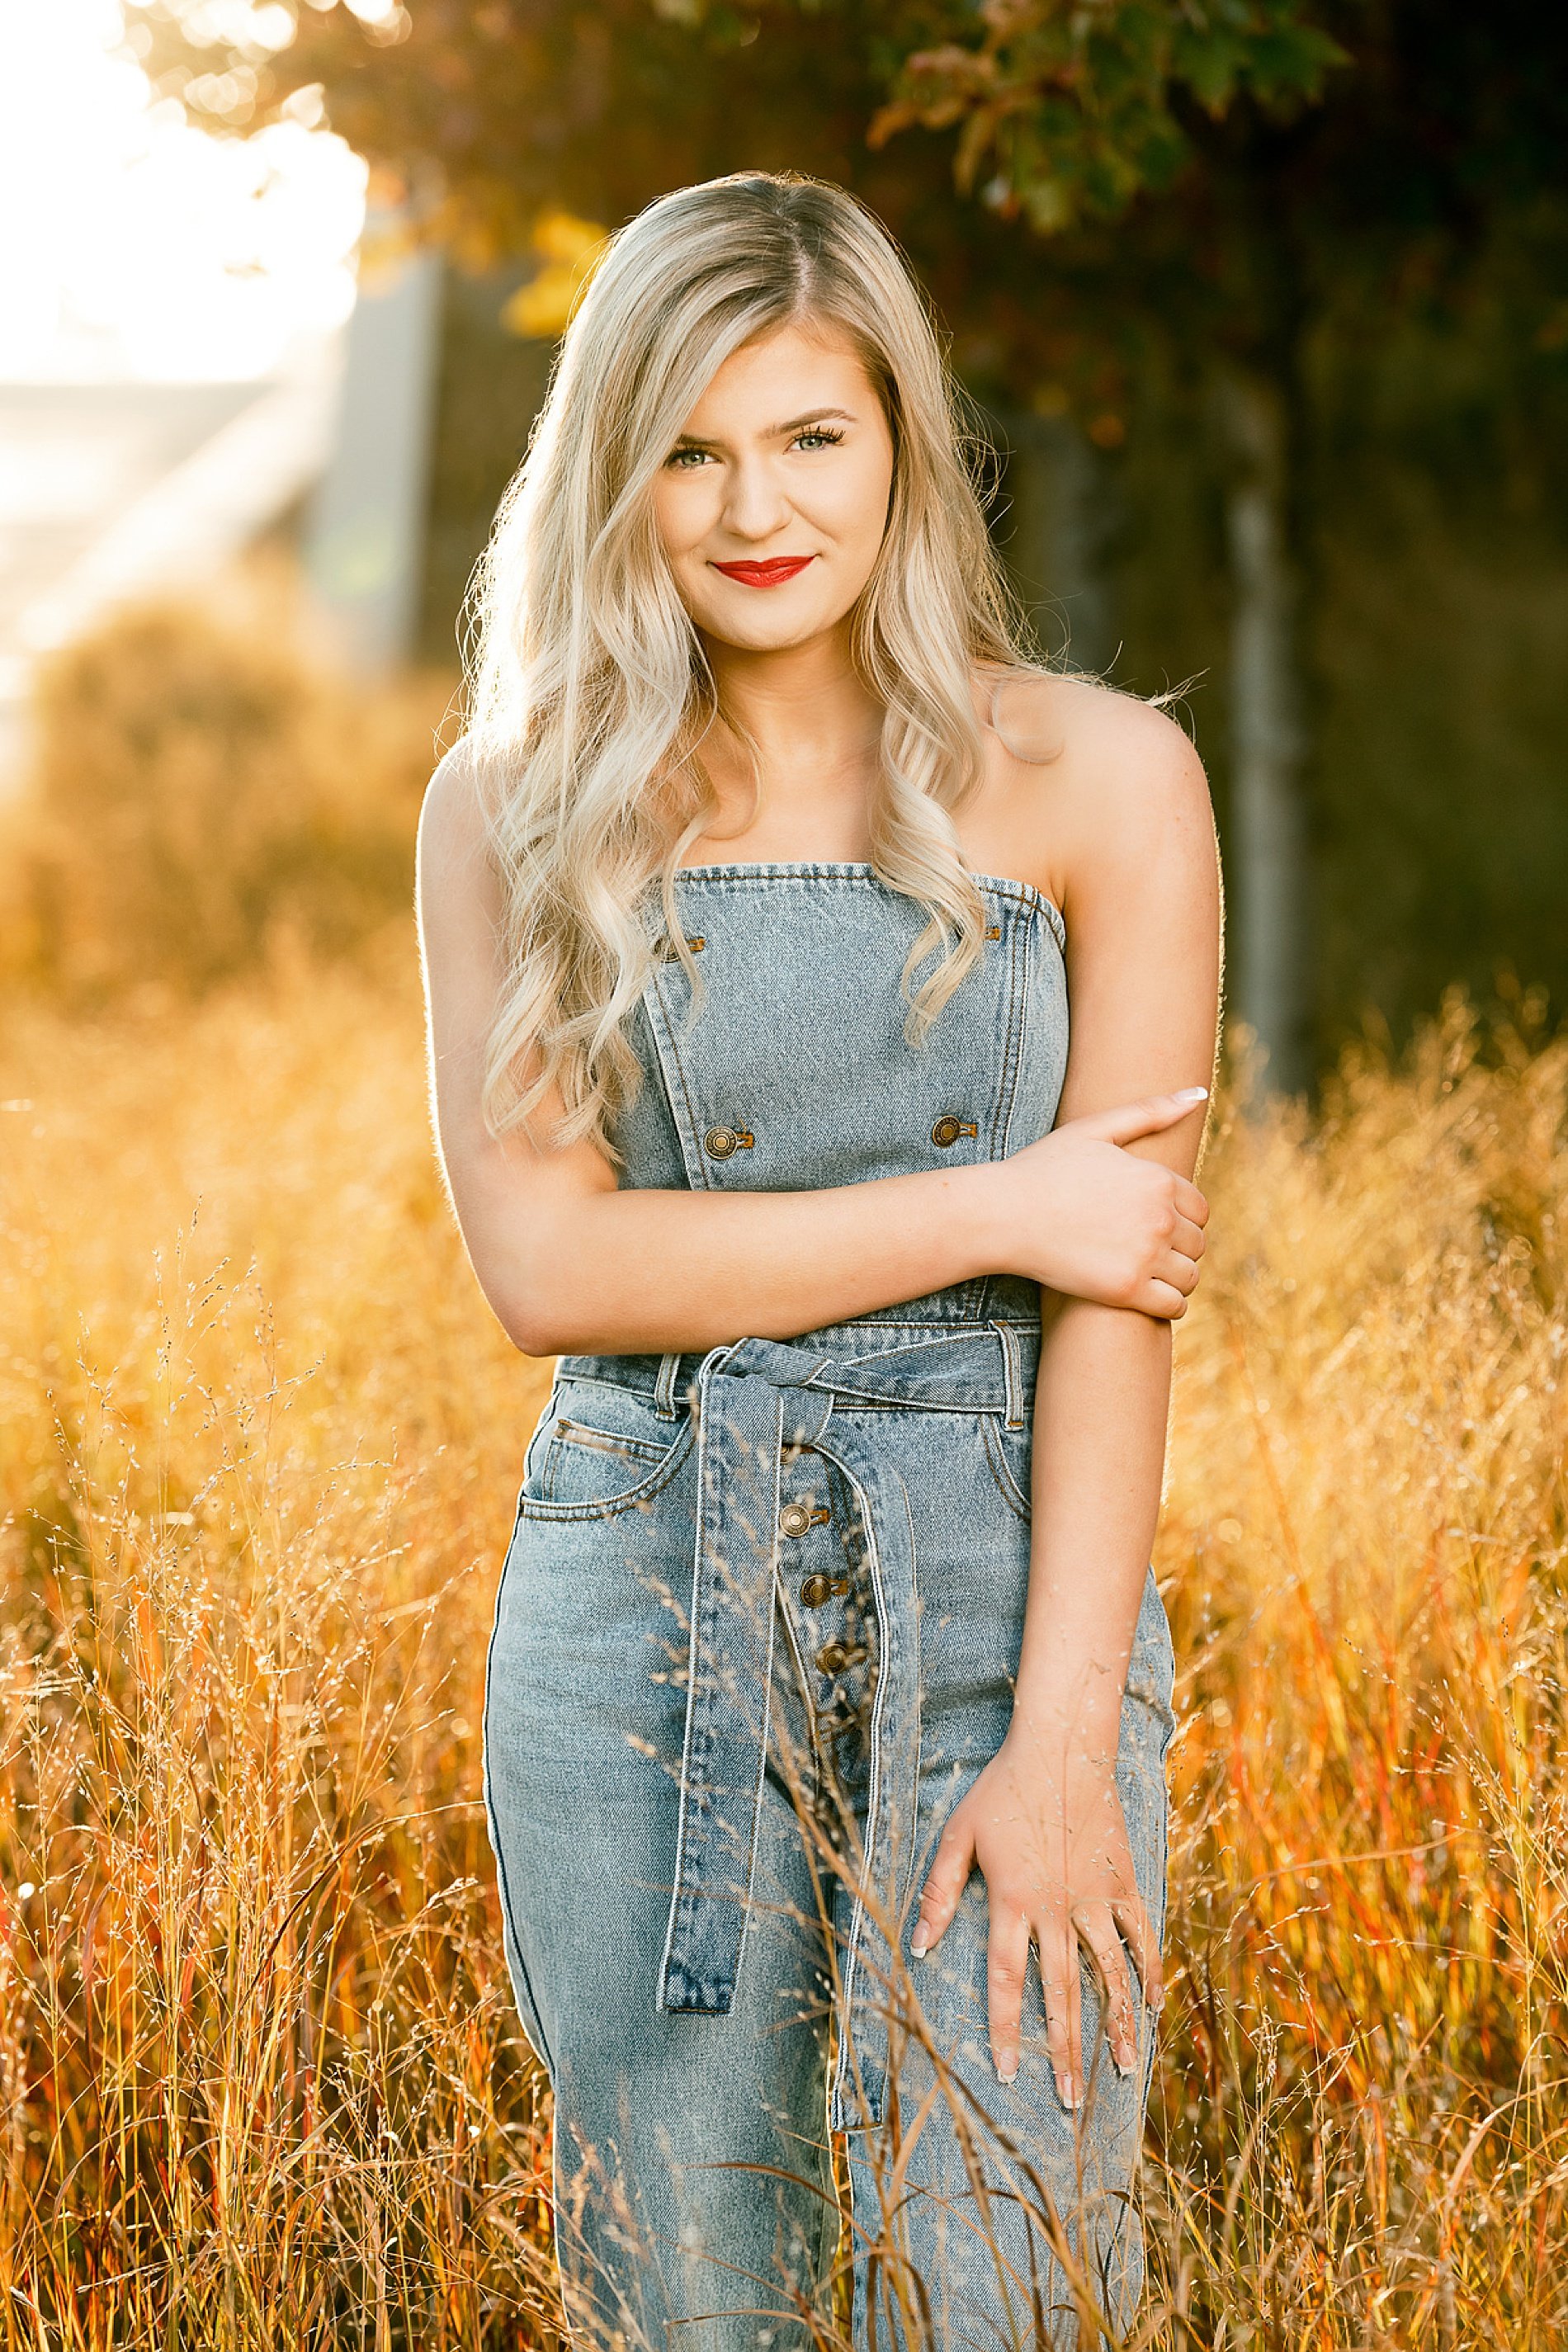  Fall Senior Session in Kansas City by Aimee Geiss photography 